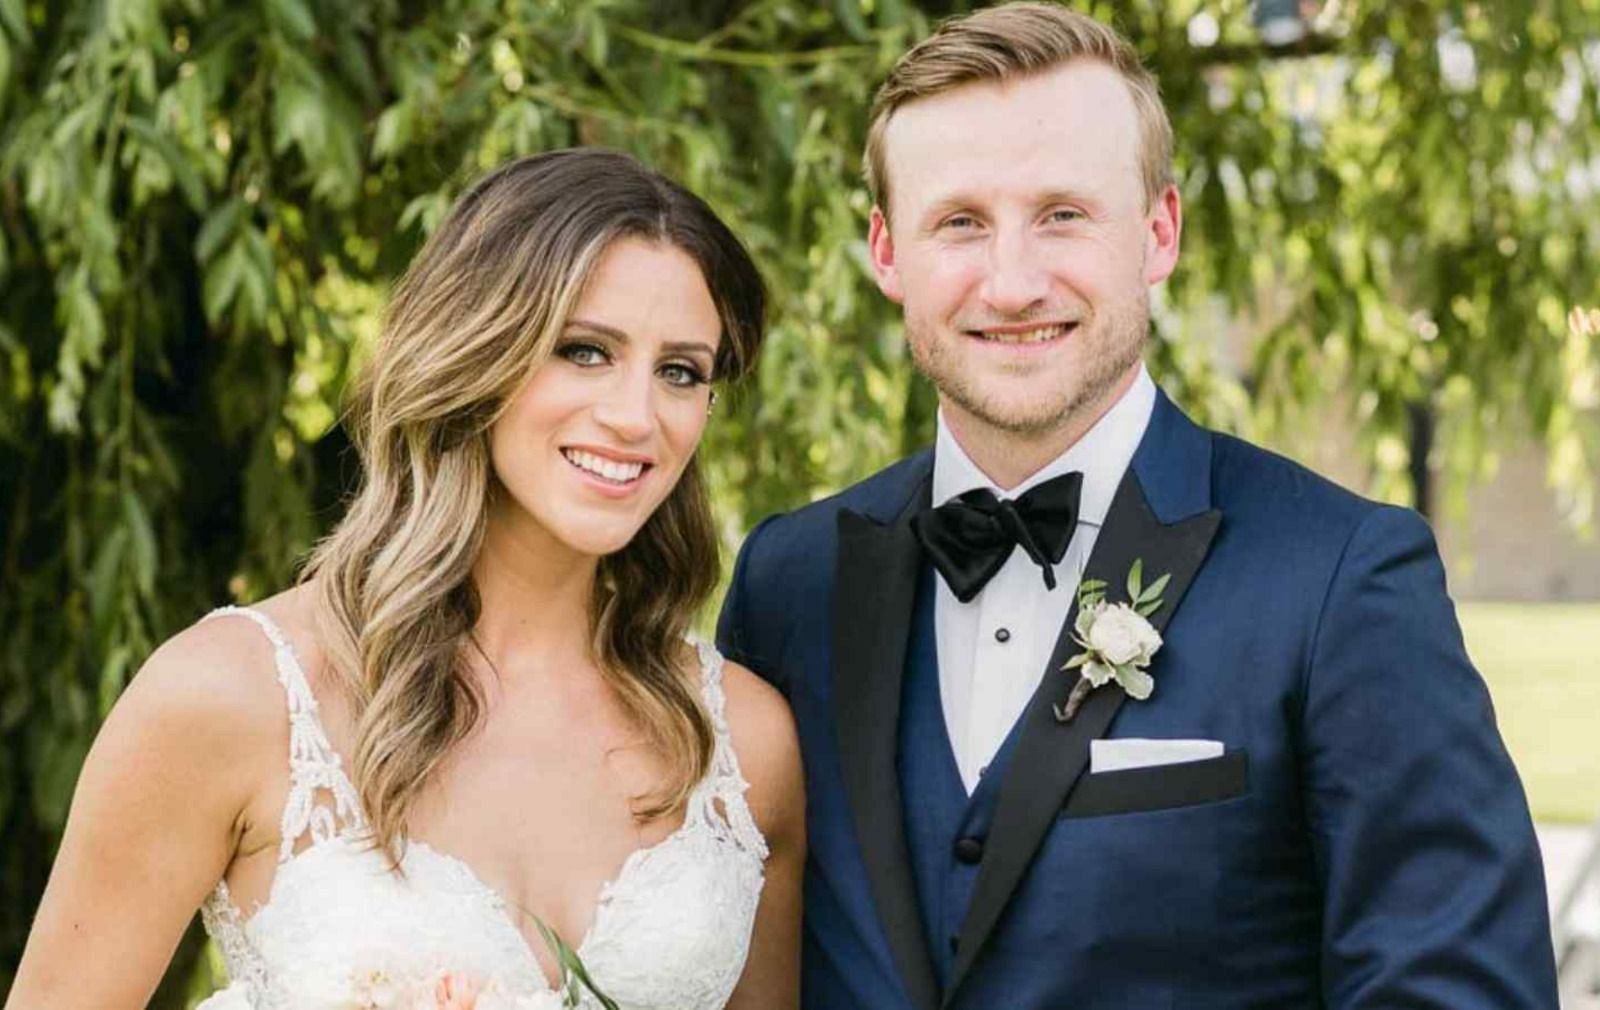 Who is steven stamkos wife?